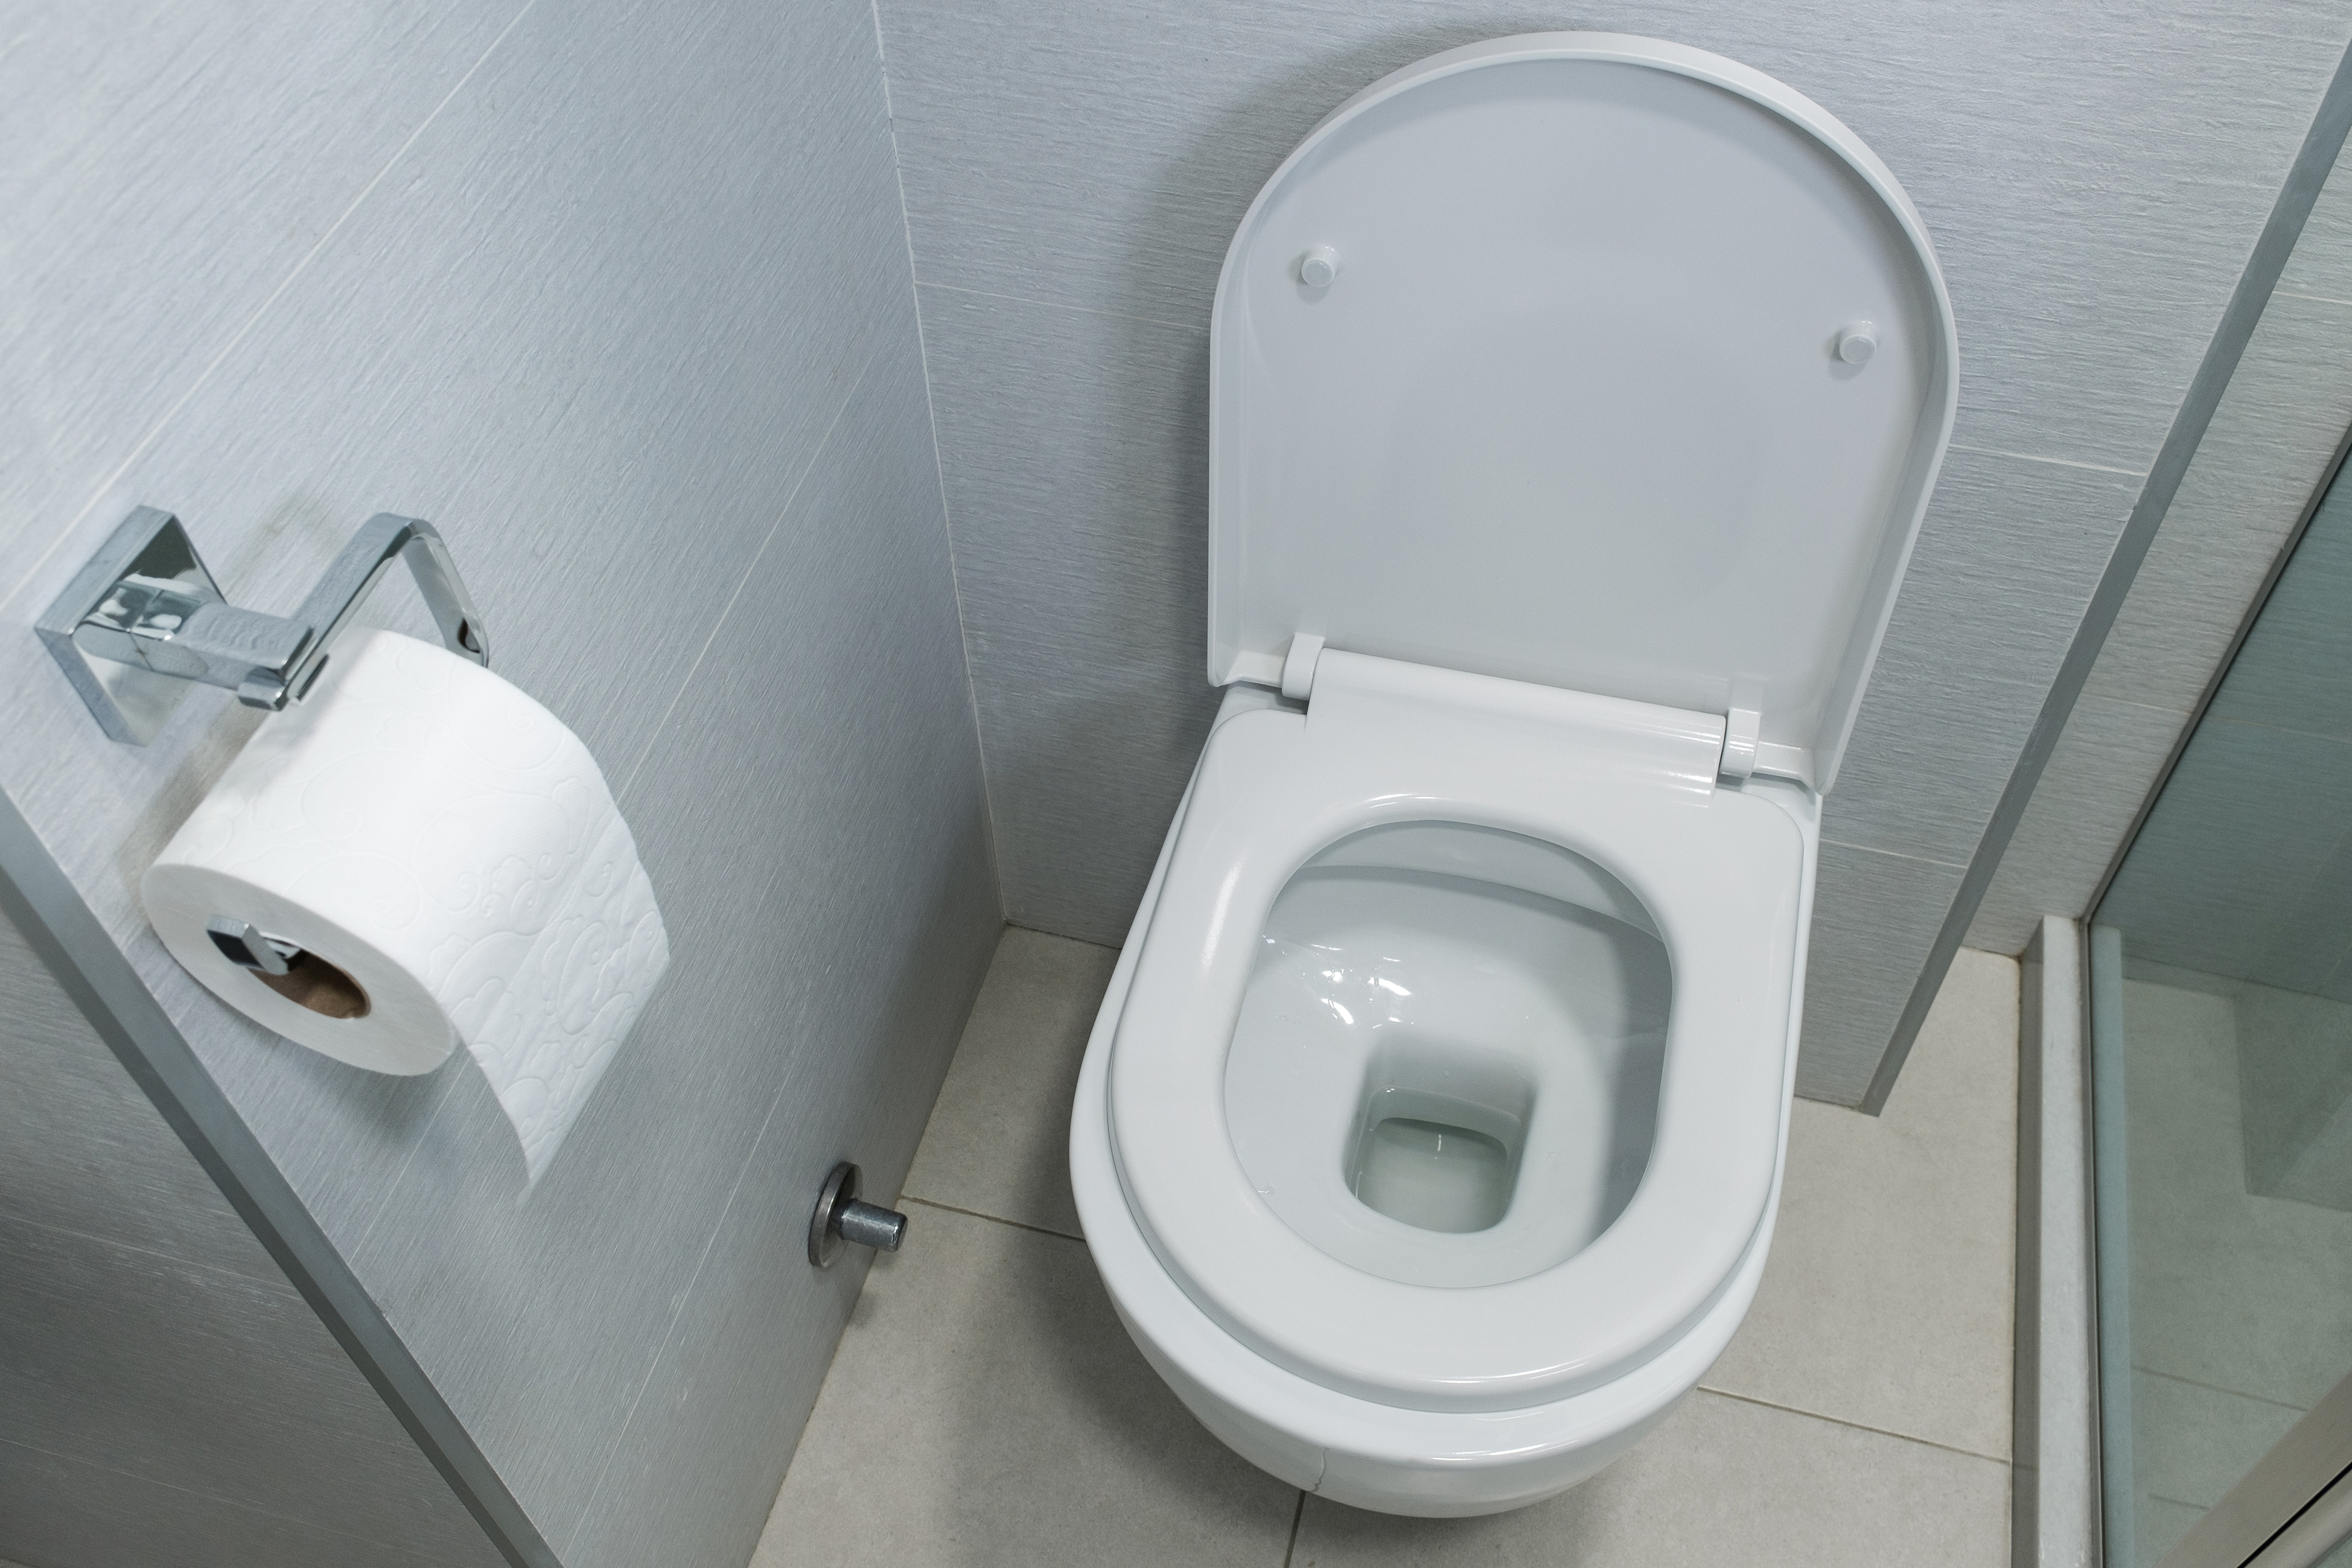 Toilet with open lid and a roll of toilet paper on the holder in a bathroom